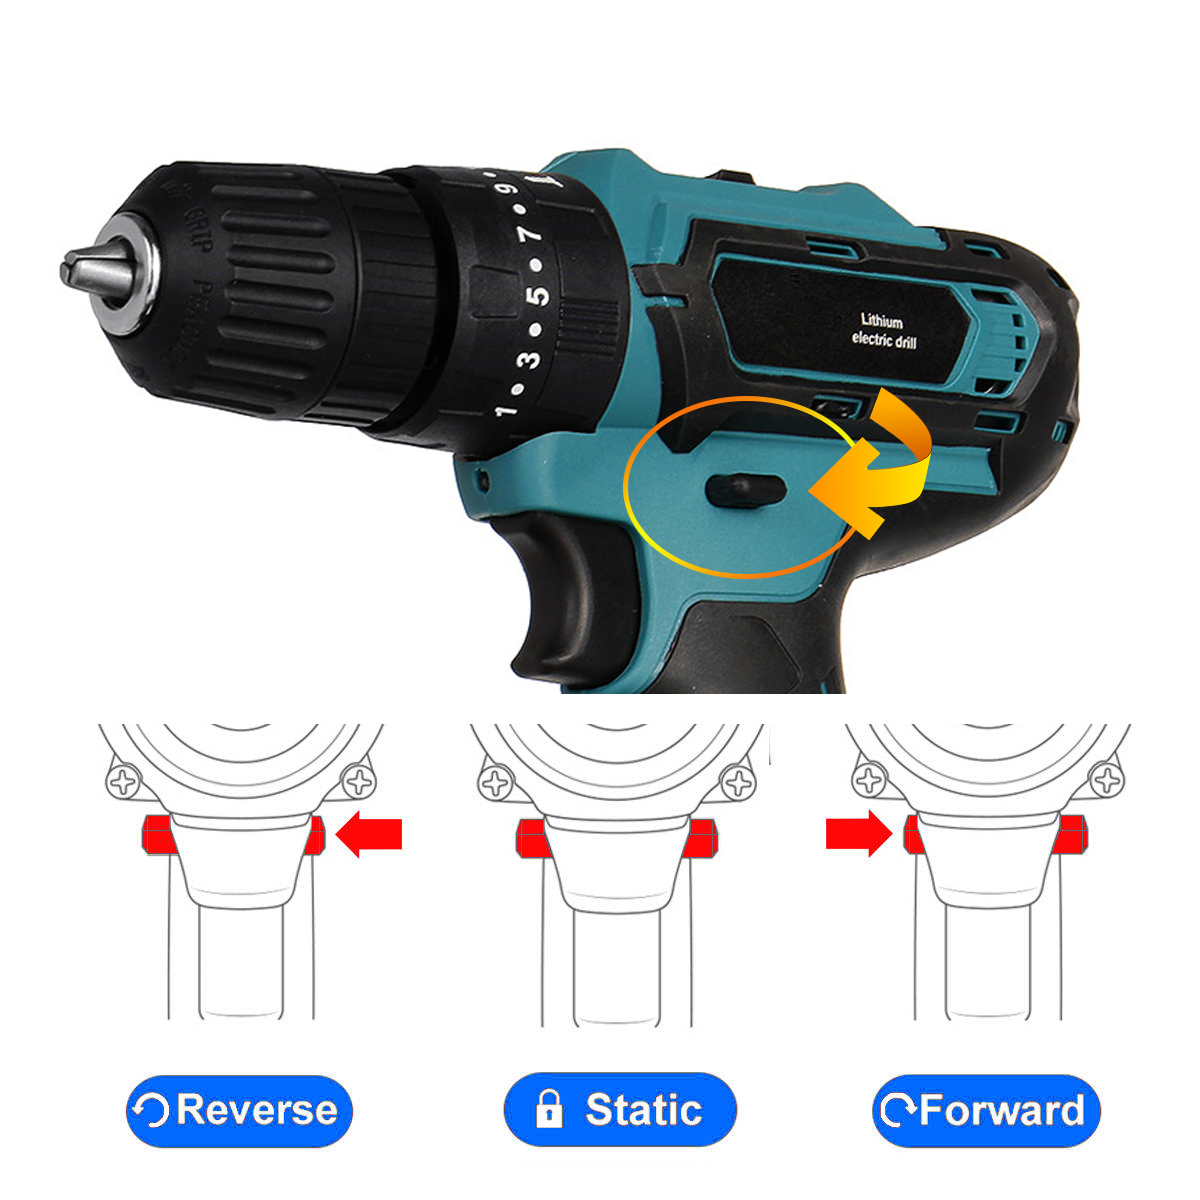 148VF-20Ah-Cordless-Electric-Impact-Drill-Rechargeable-Drill-Screwdriver-W-1-or-2-Li-ion-Battery-1888042-11